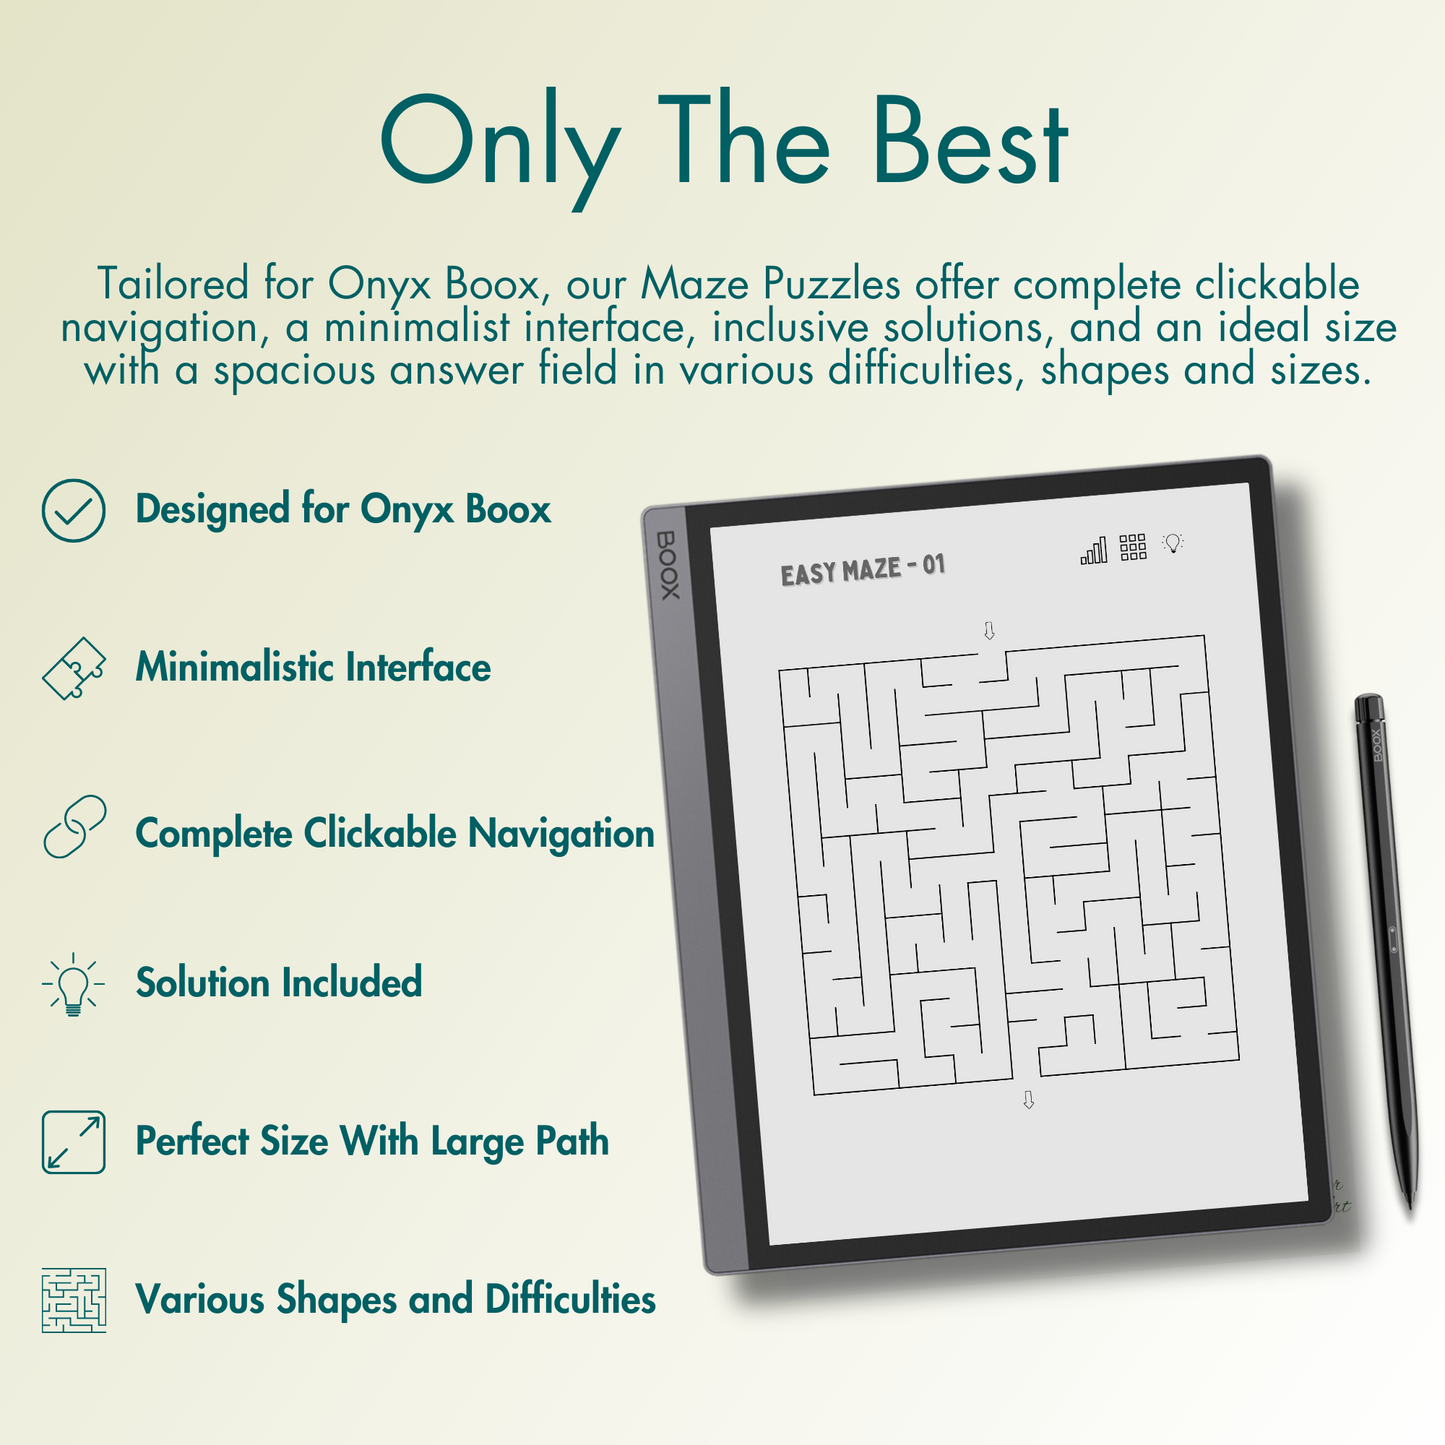 Our Maze Puzzles offer complete clickable navigation, a minimalist interface, inclusive solutions, and an ideal size with a spacious answer field for Onyx Boox E-Ink screen.